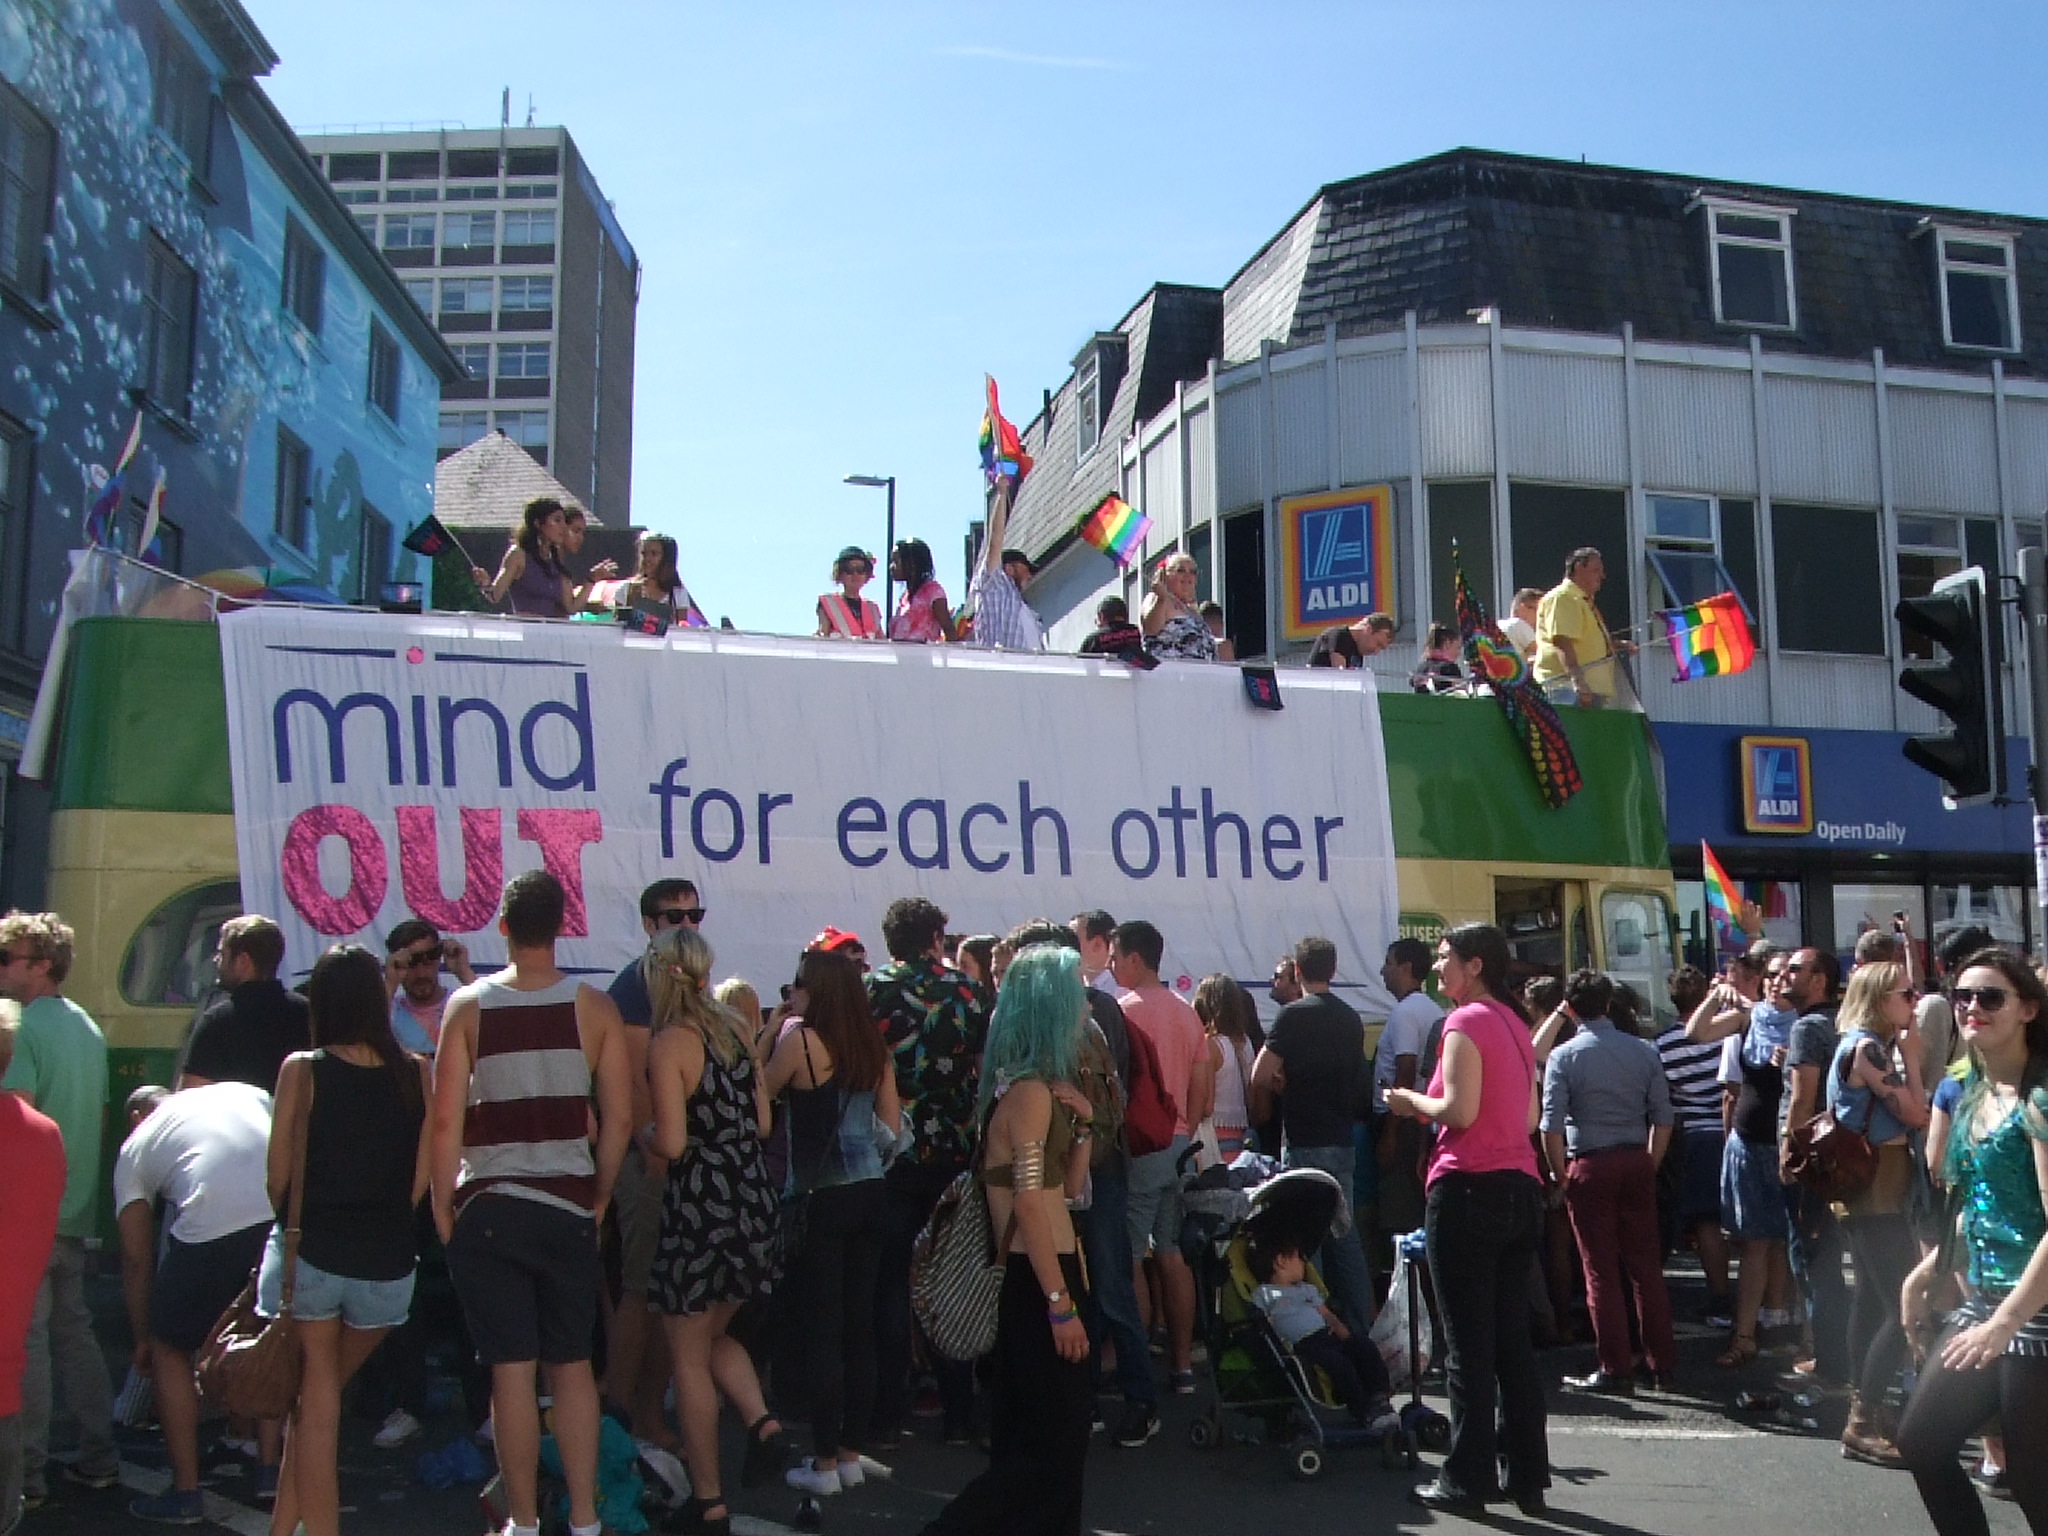 birghton pride bus in 2015 surrounded by people